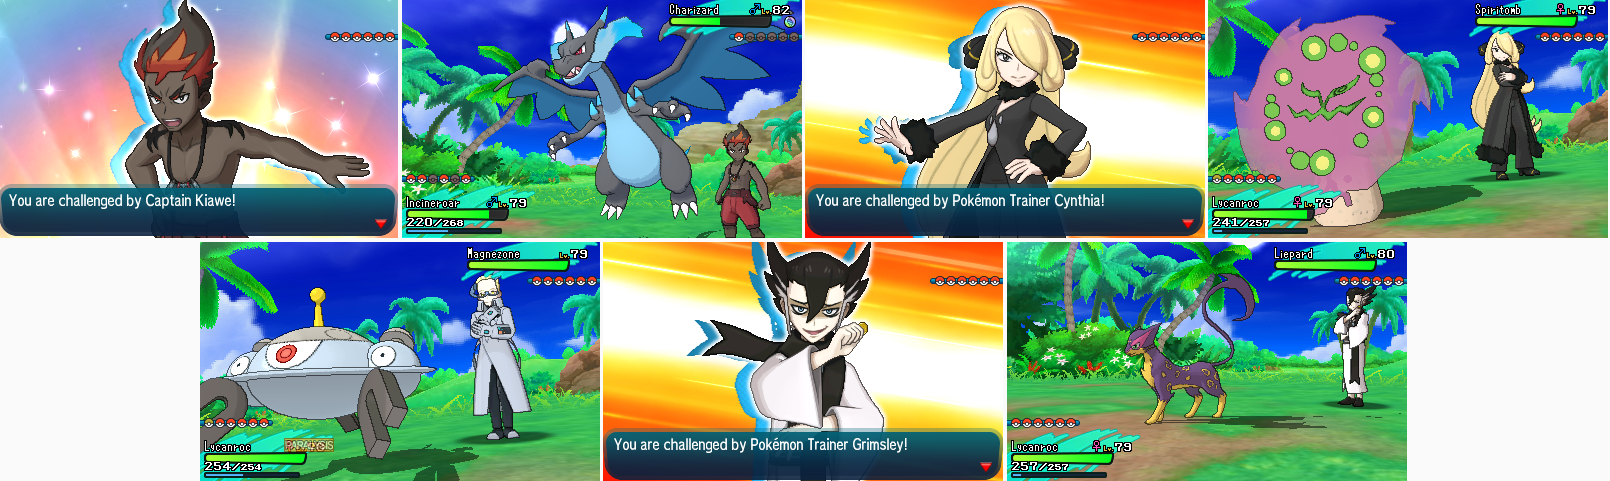 Brutal Pokemon Sun And Moon Hack Makes The Game Way Harder